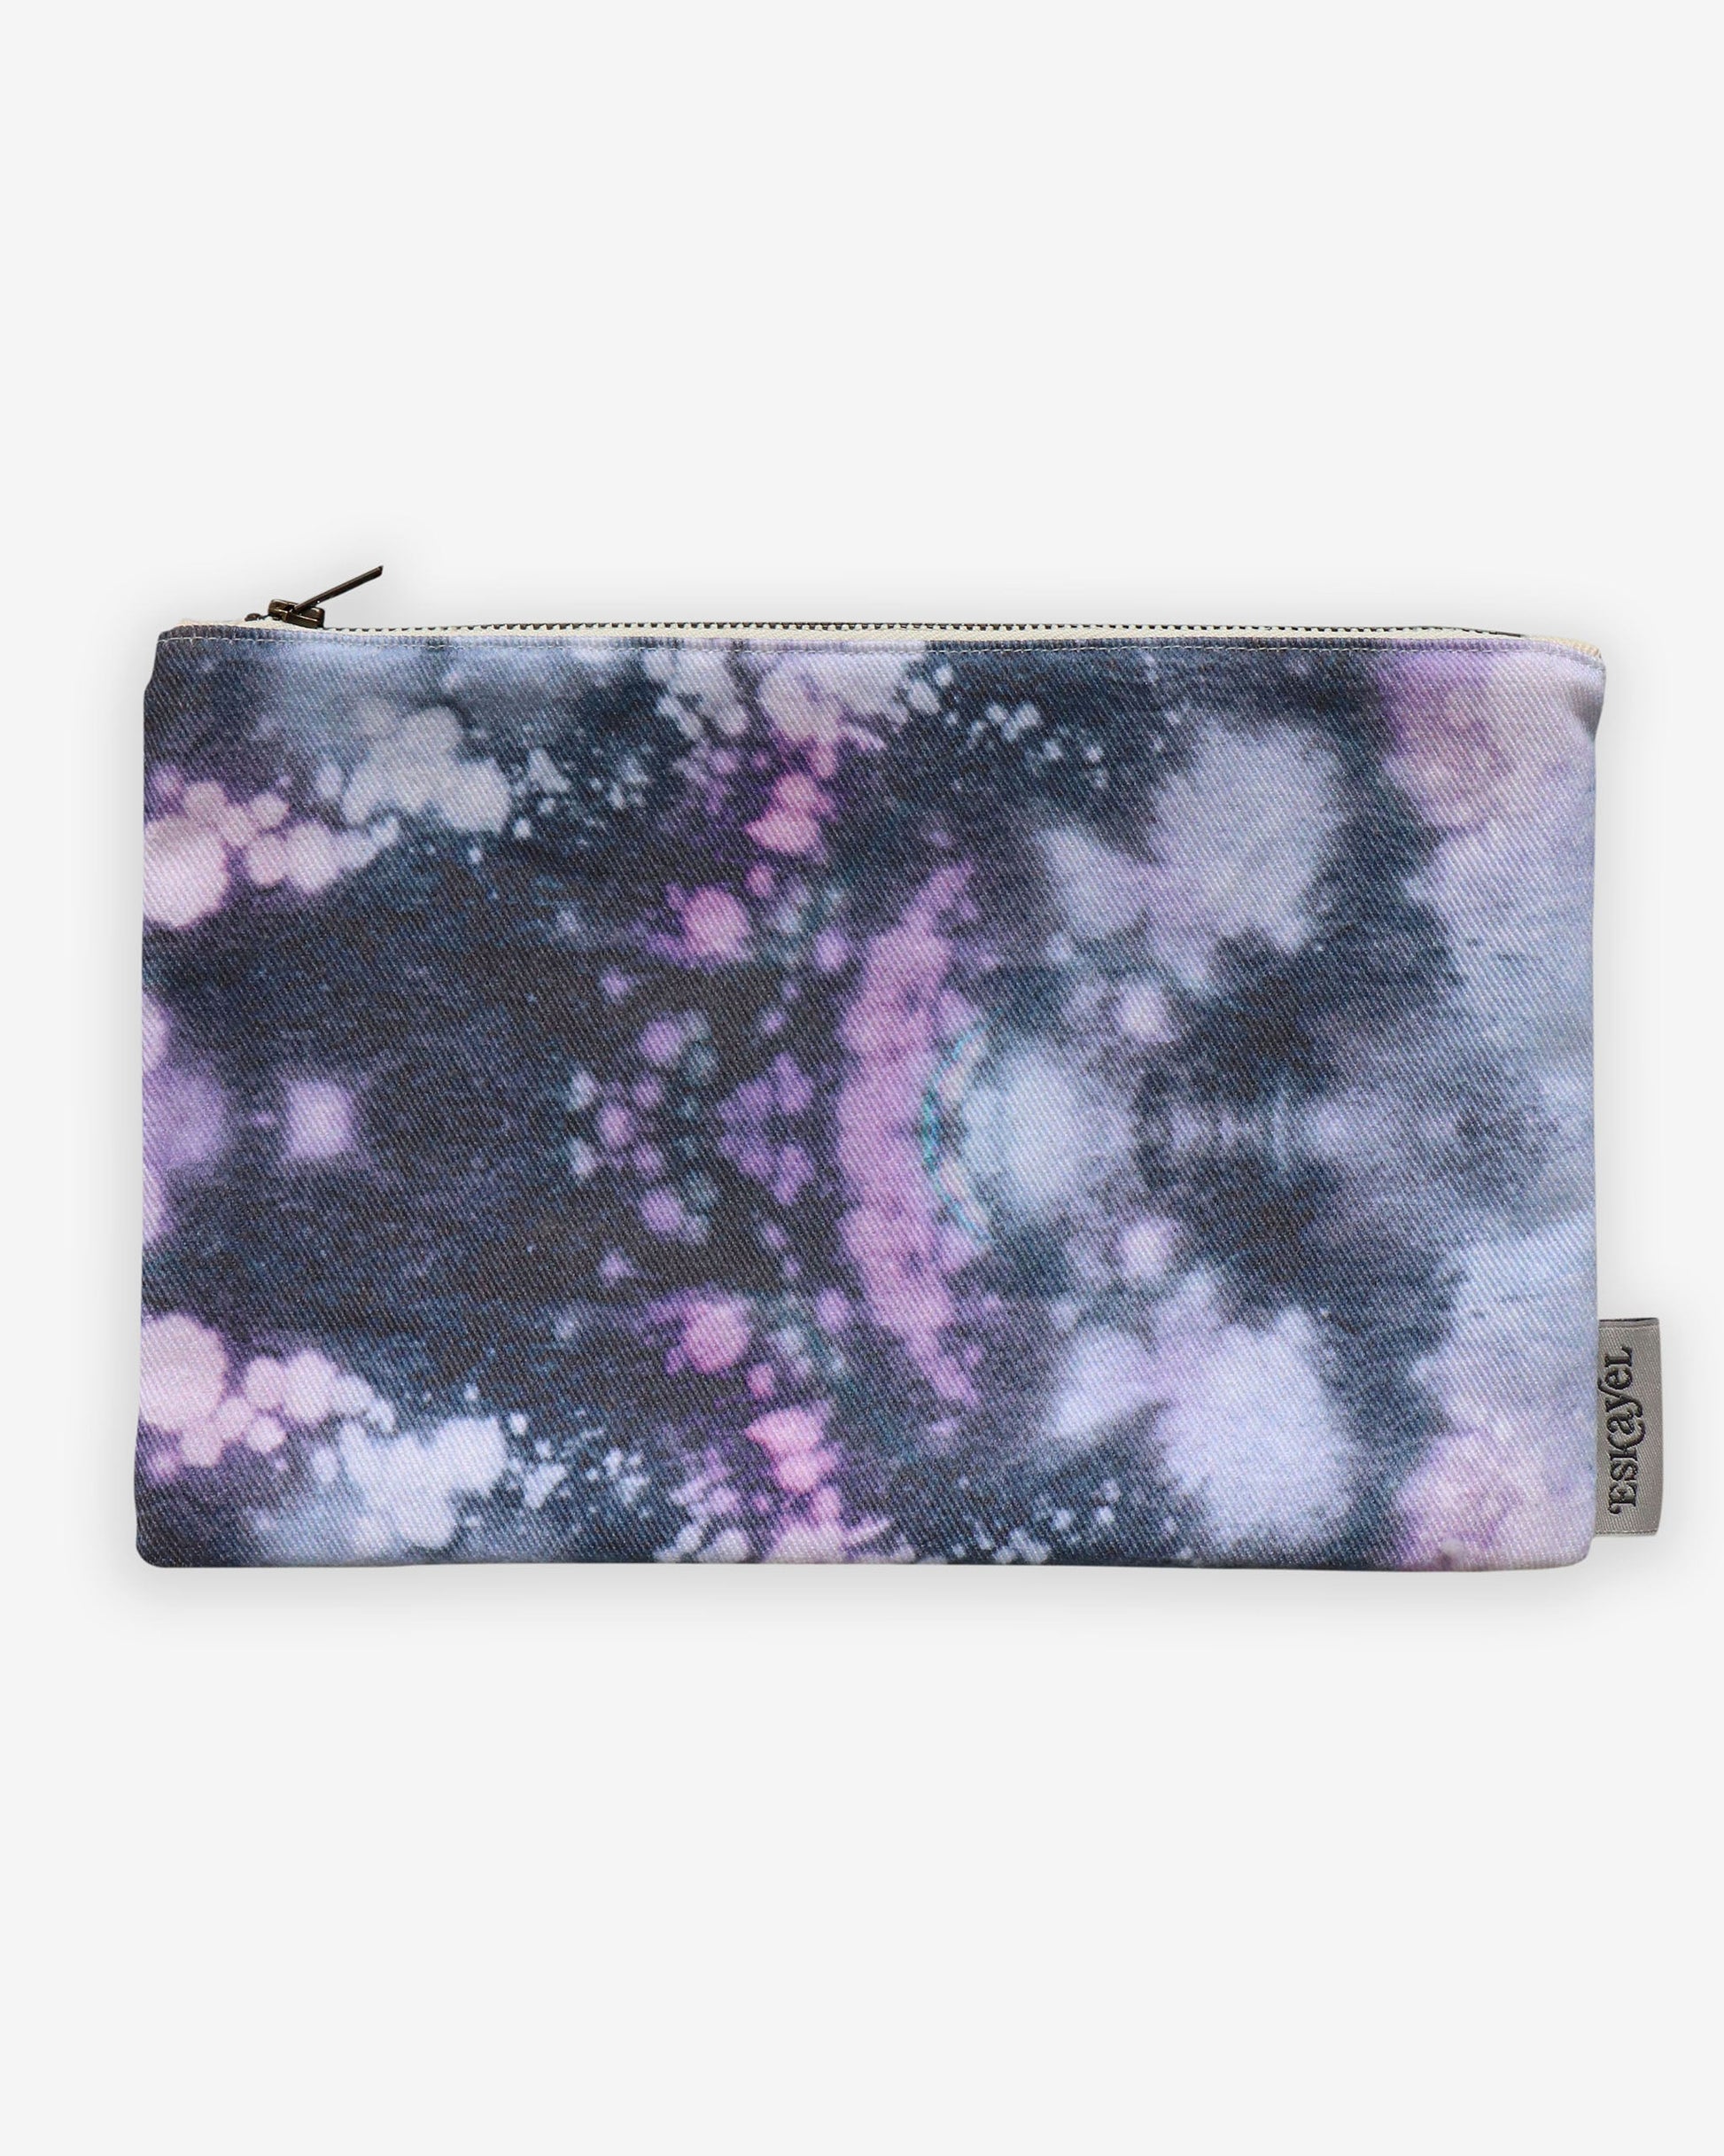 A purple and black Solar Pouch Beryl with a tie dye pattern, perfect for carrying small items